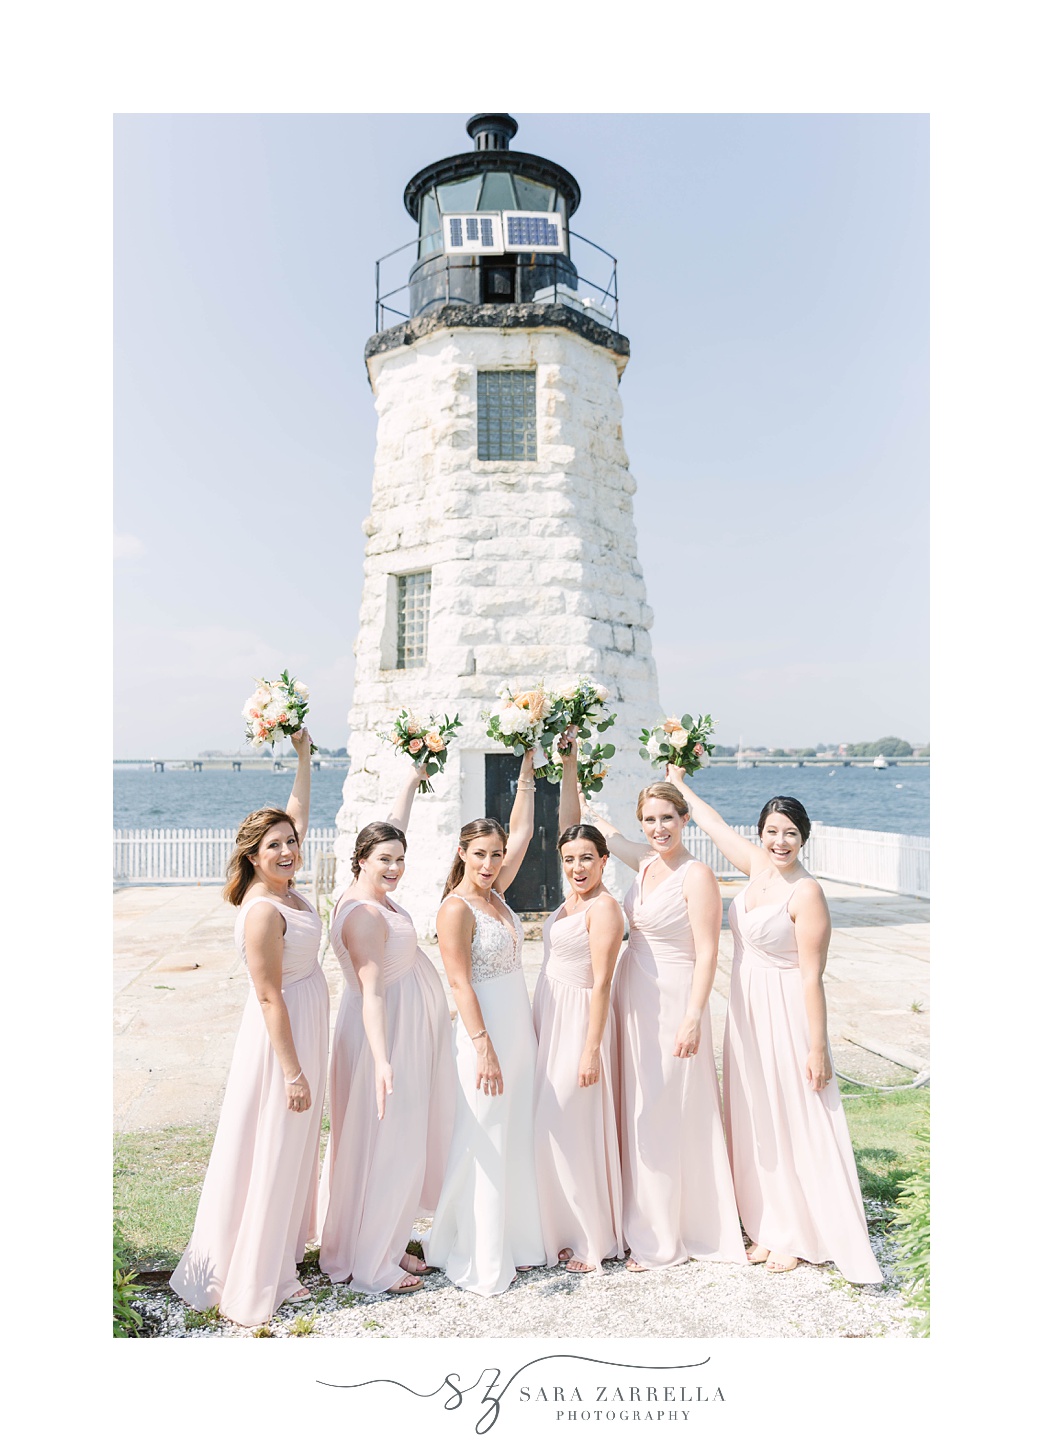 bridesmaids lift bouquets by lighthouse on Gurney’s Newport Resort wedding day